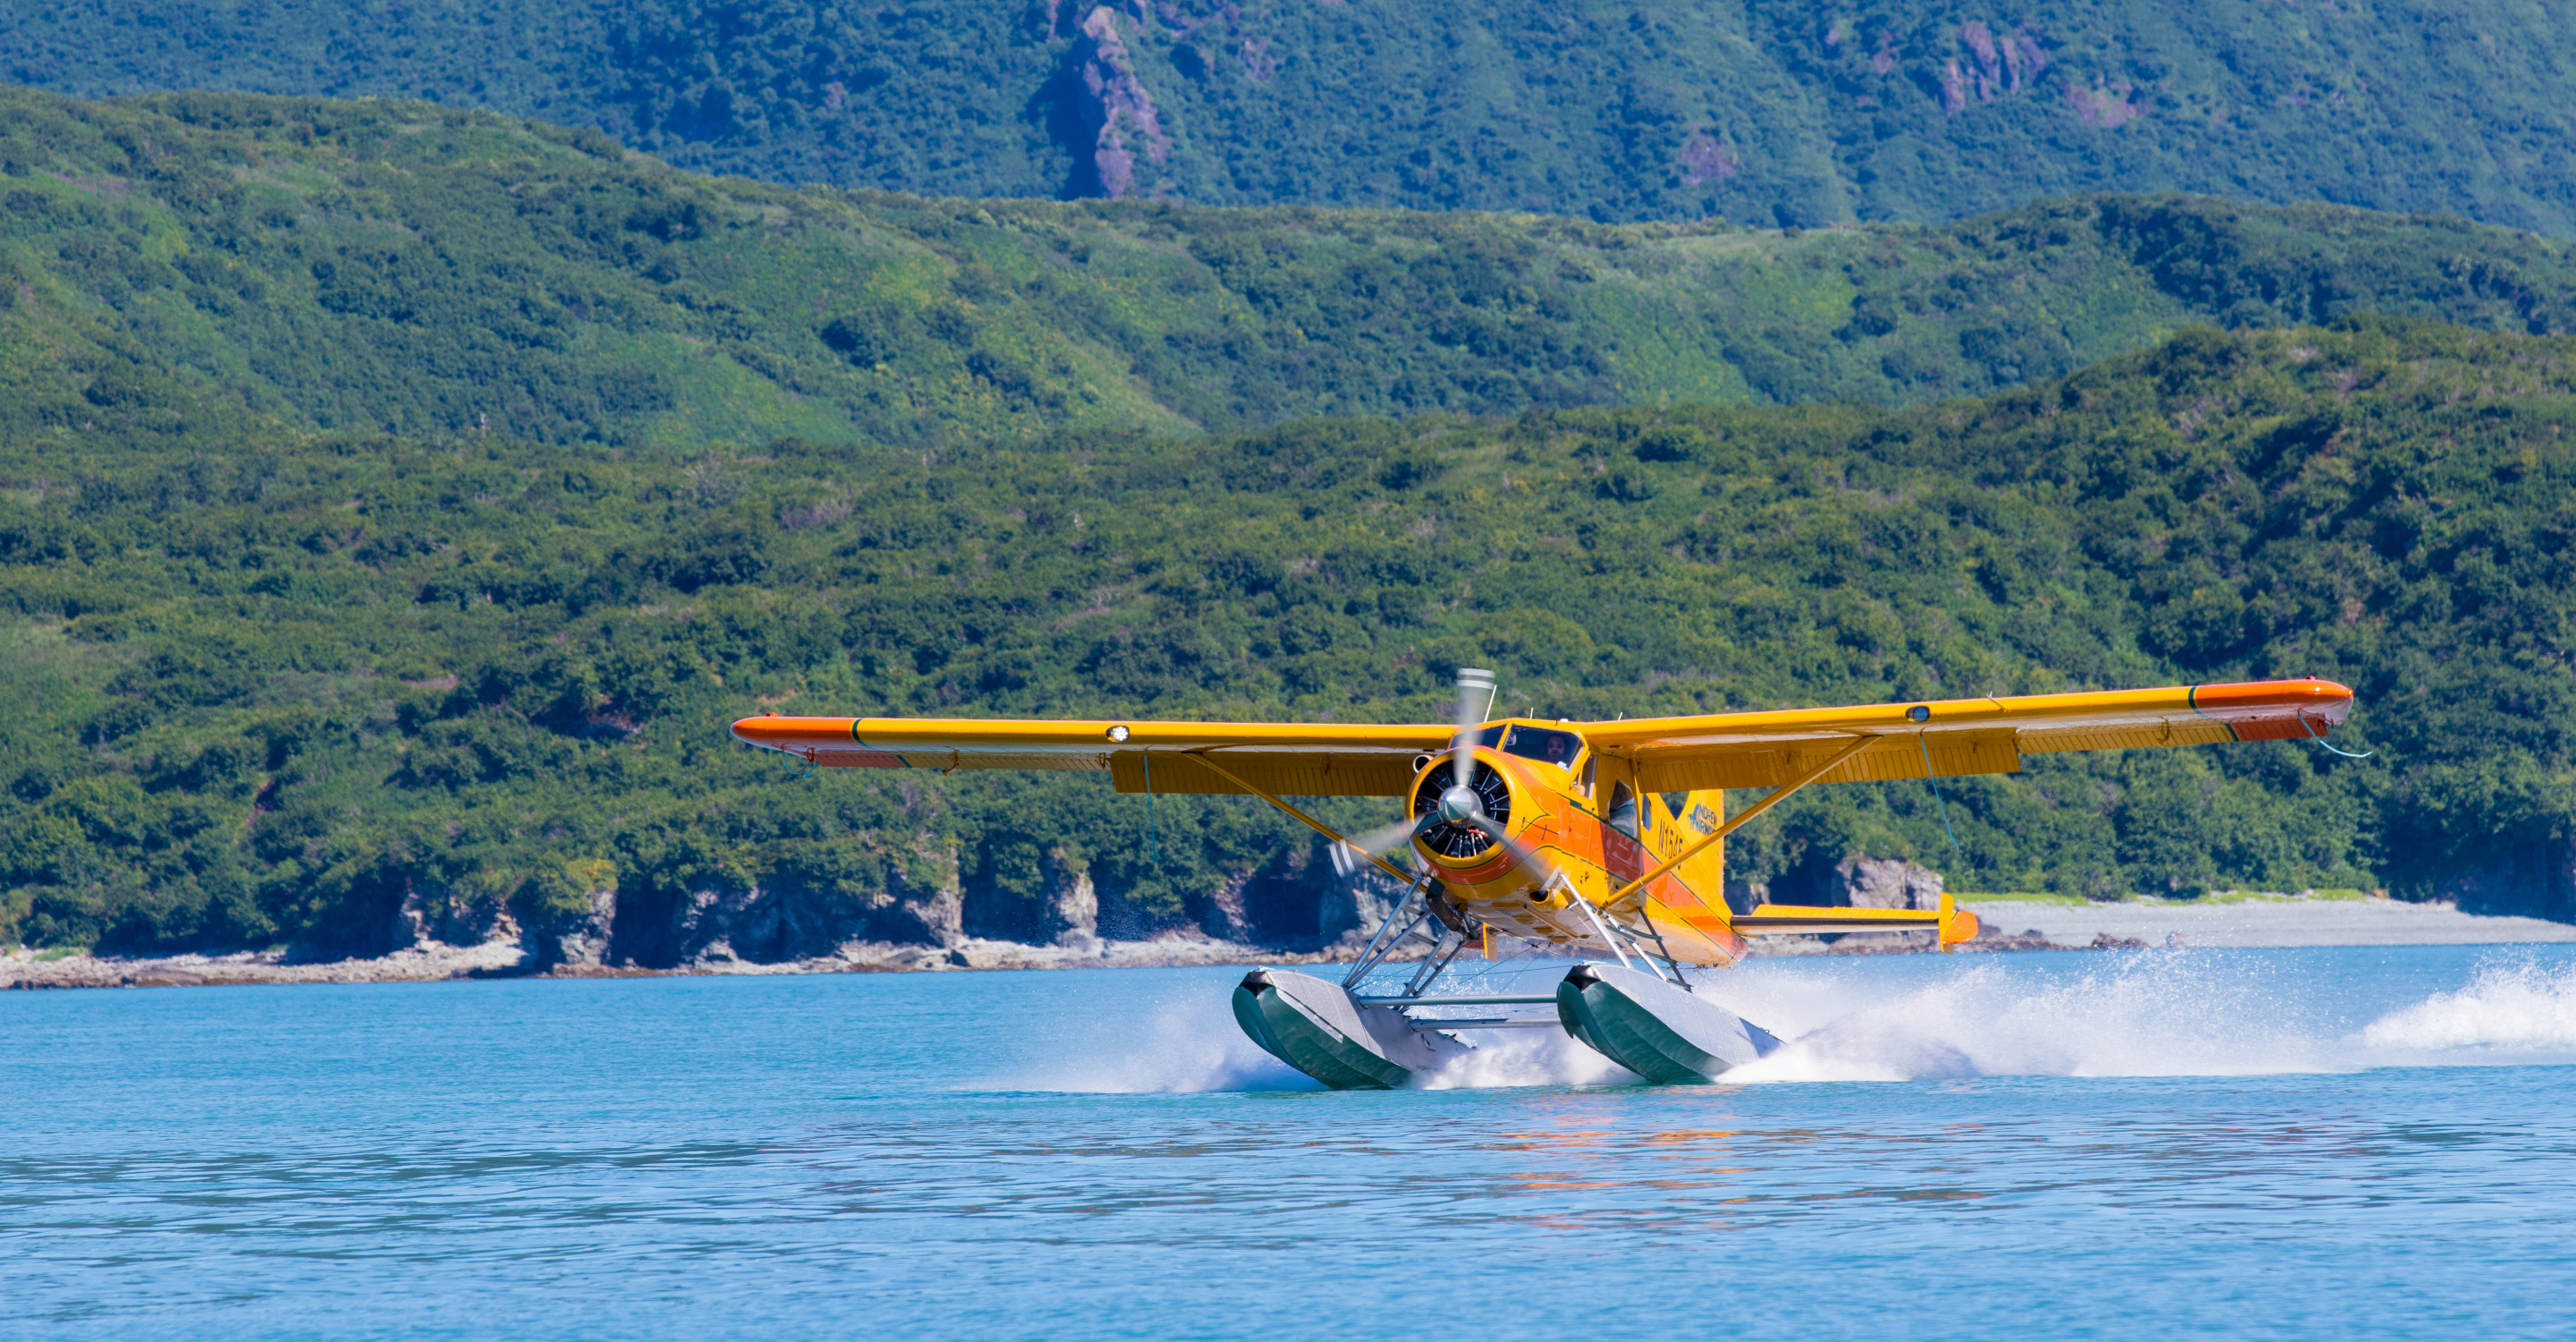 A seaplane takes off from the water in Katmai National Park, Alaska, USA